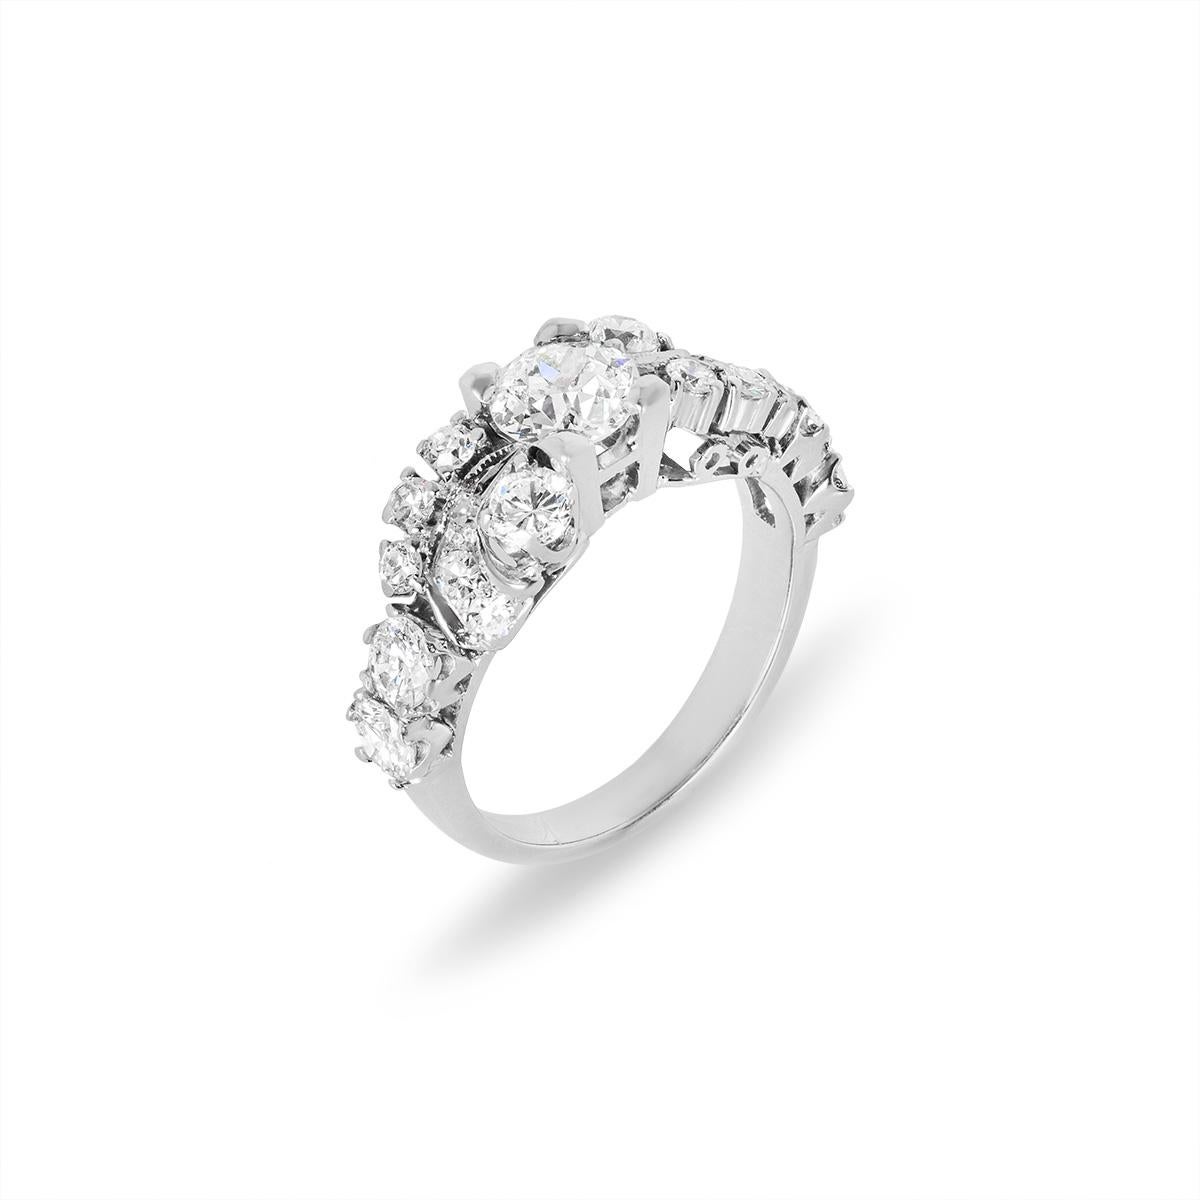 A unique 14k white gold diamond engagement ring. The ring is set to the centre with an Old European cut diamond weighing approximately 0.86ct, H colour and VS clarity. Further complementing the centre diamond are 6 round brilliant cut diamonds and